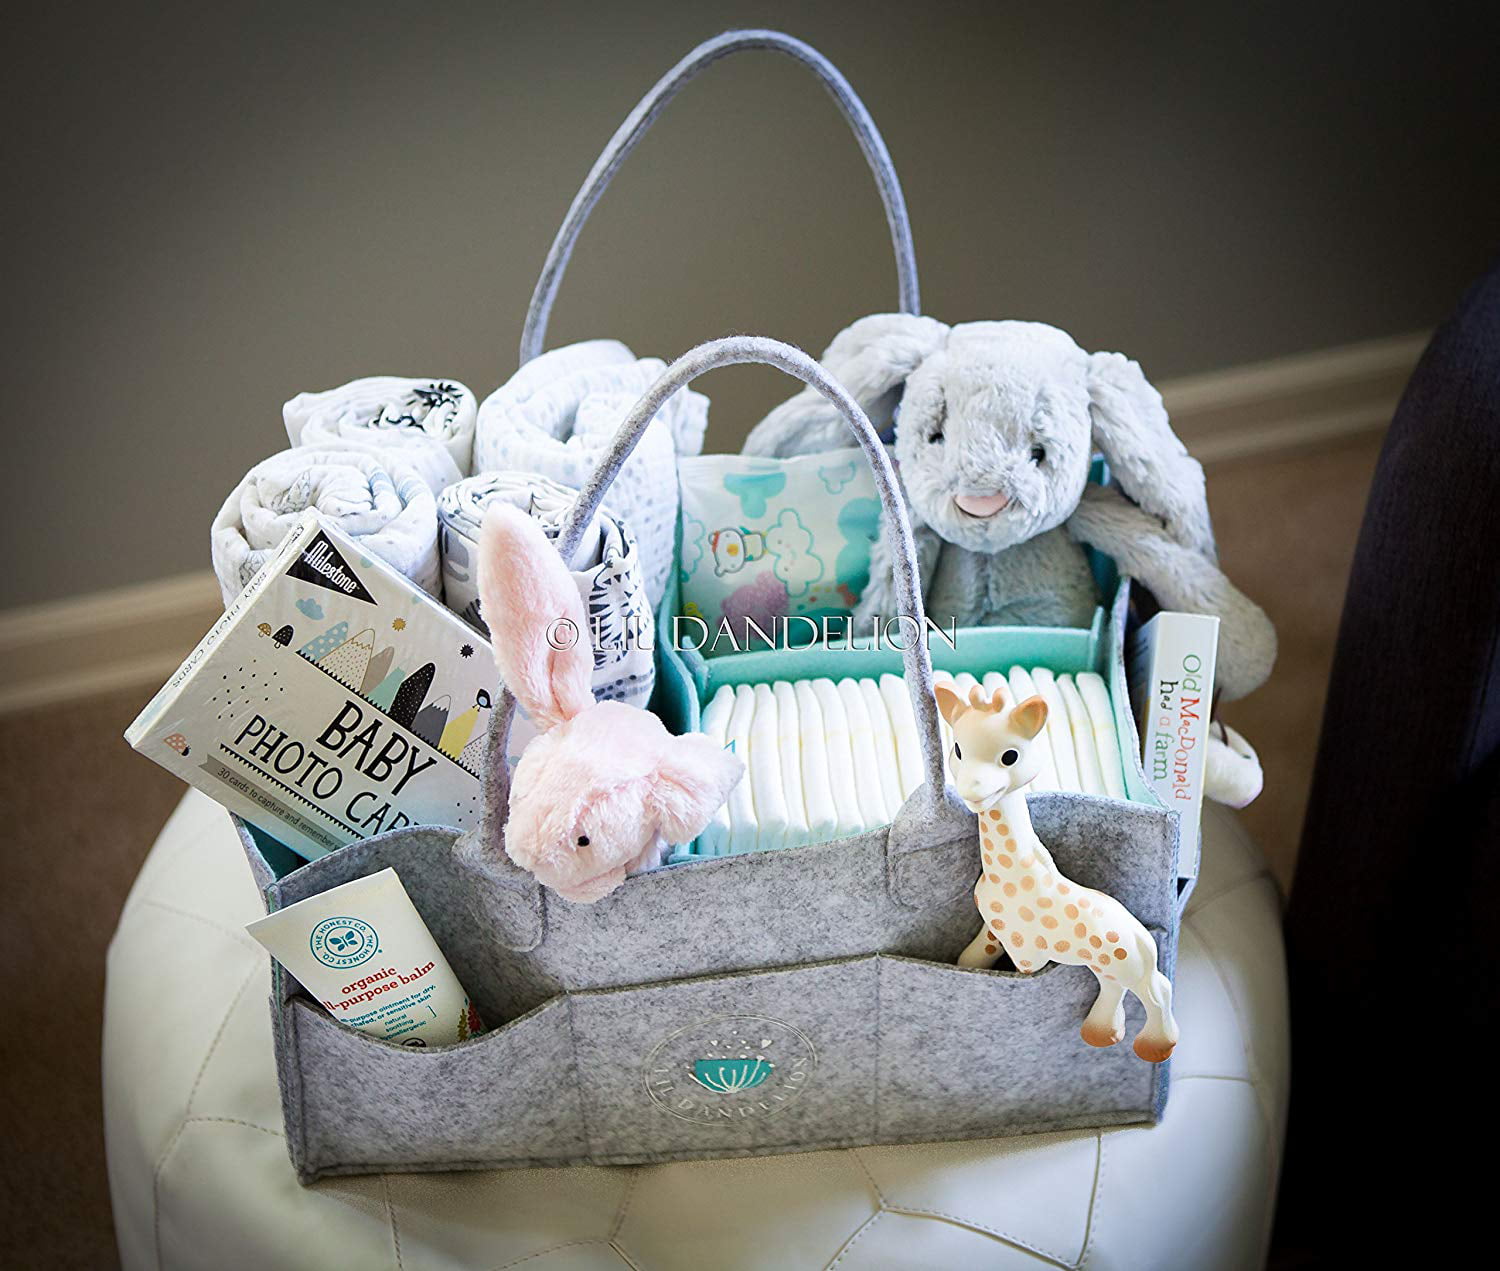 Boy Girl Baby Shower Gift Basket Portable Diaper Tote Bag for Changing Table Newborn Registry Must Haves Baby Diaper Caddy Organizer Extra Large Storage Nursery Bin for Diapers Wipes & Toys 